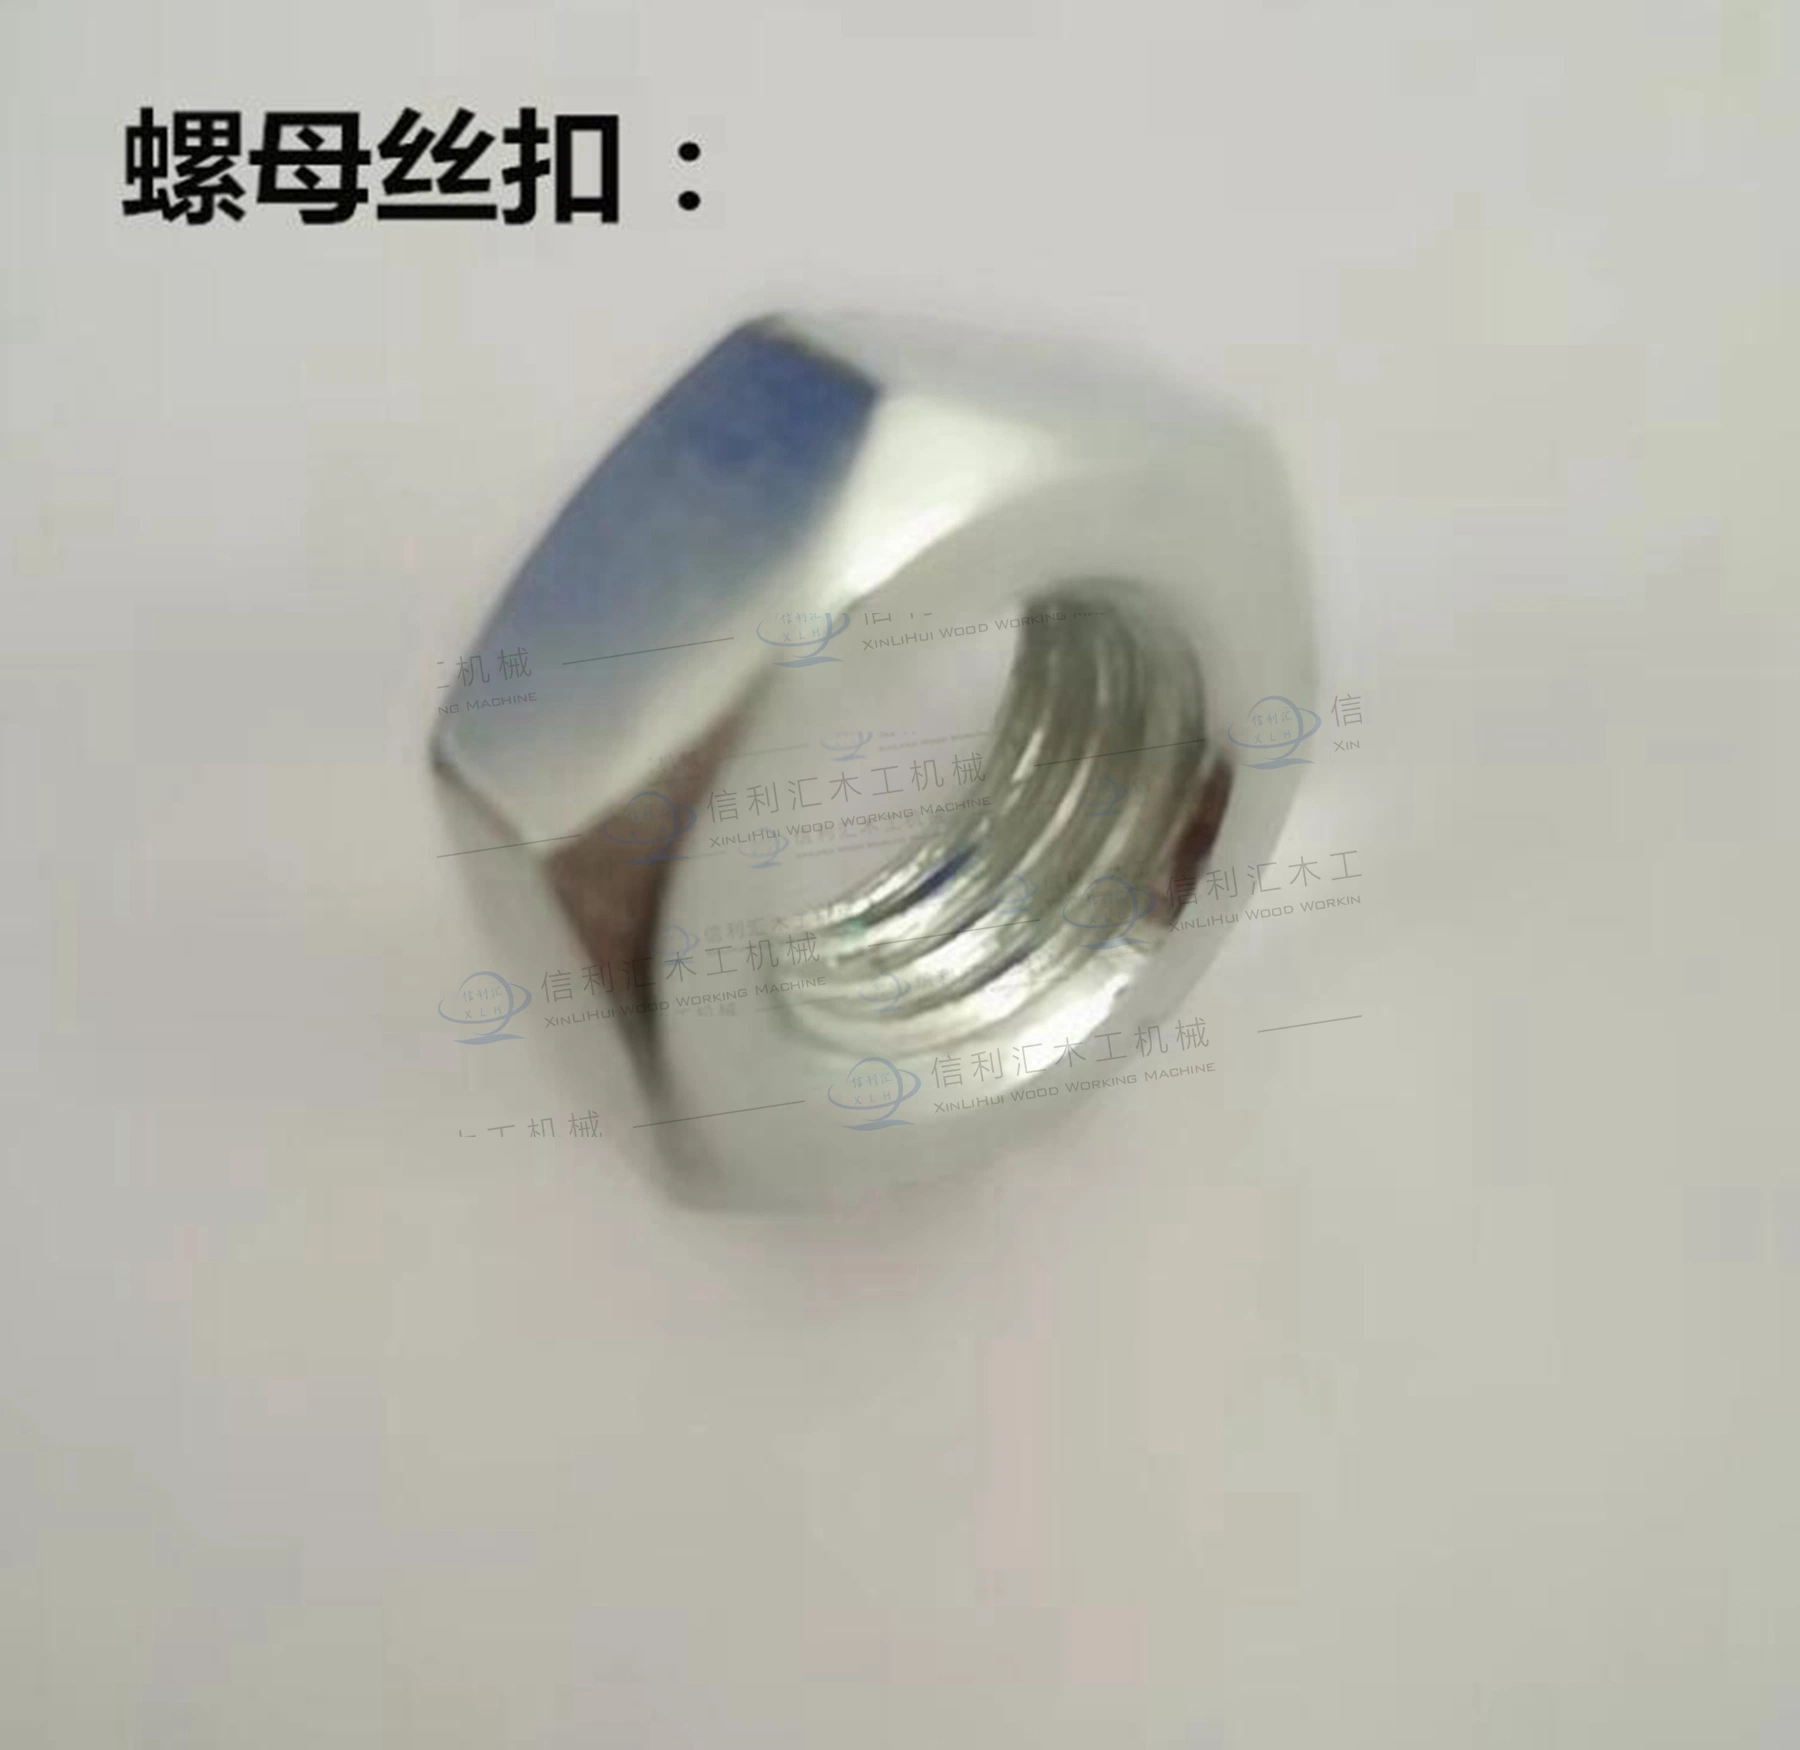 China Wholesale/Supplier Custom Heavy Carbon Steel Stainless Black Insert Thin Hexagon Head Nut and Bolt DIN934 Galvanized M6 M5 Hex Nut